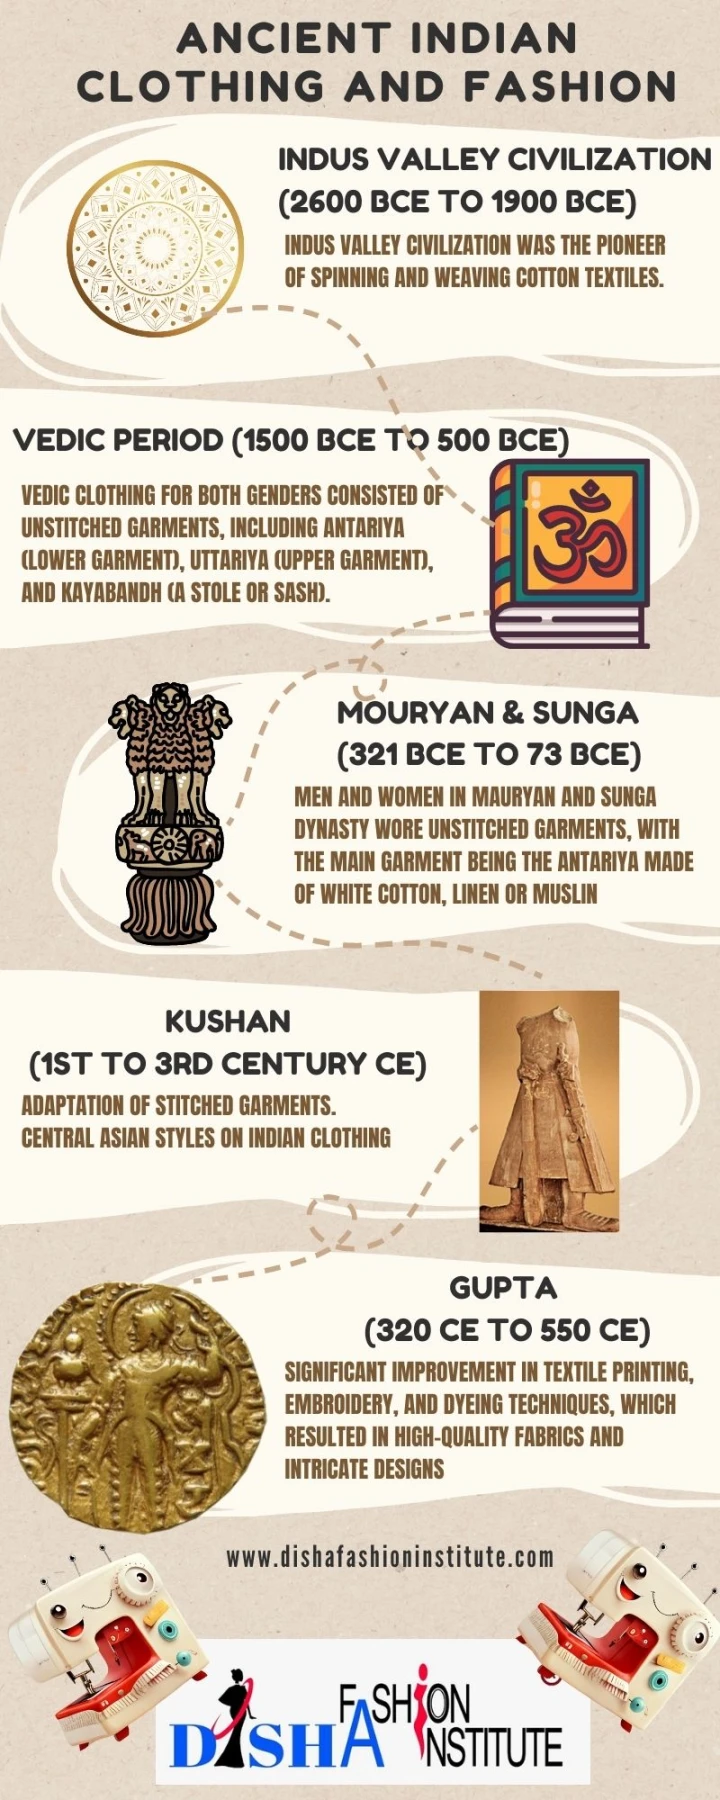 Ancient Indian Clothing and Fashion